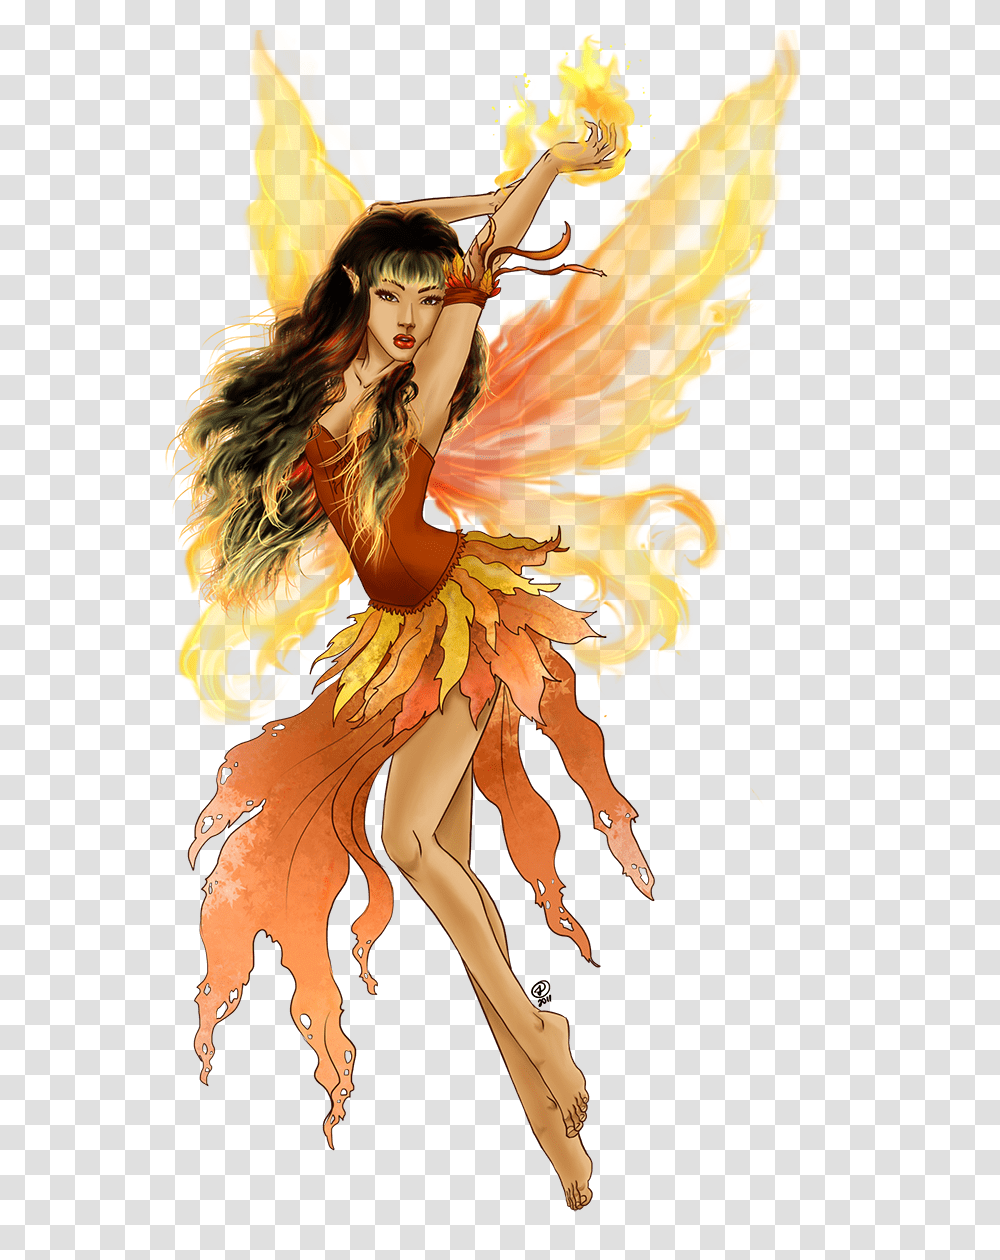 Fairy, Fantasy, Dance Pose, Leisure Activities, Performer Transparent Png